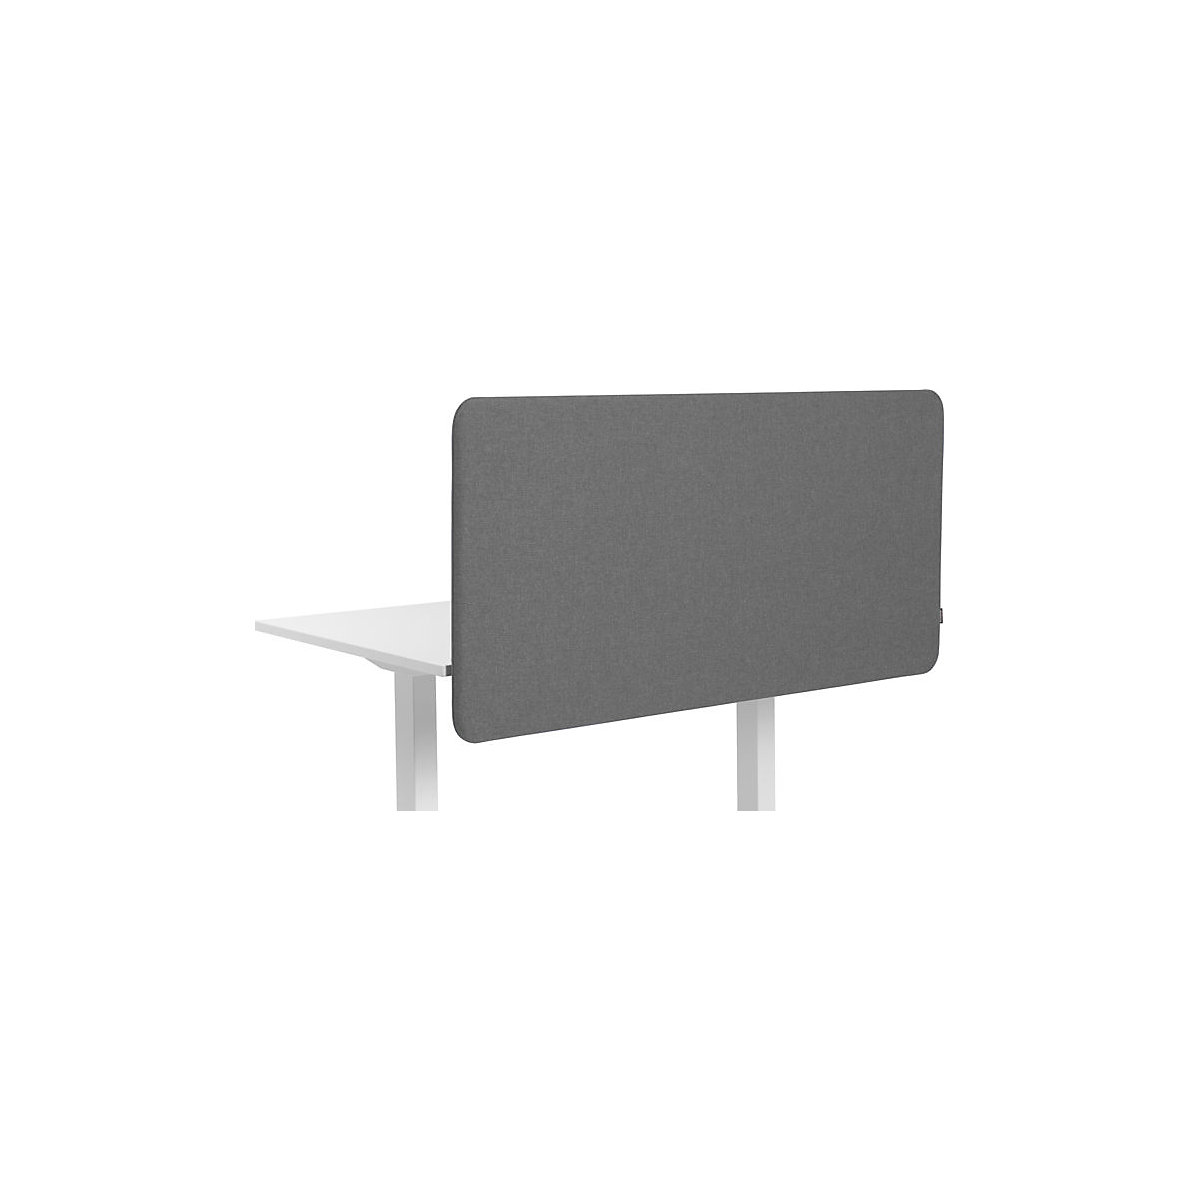 Softline Salsa acoustic desk partition, suspended downwards, HxW 650 x 1600 mm, fabric, grey-1